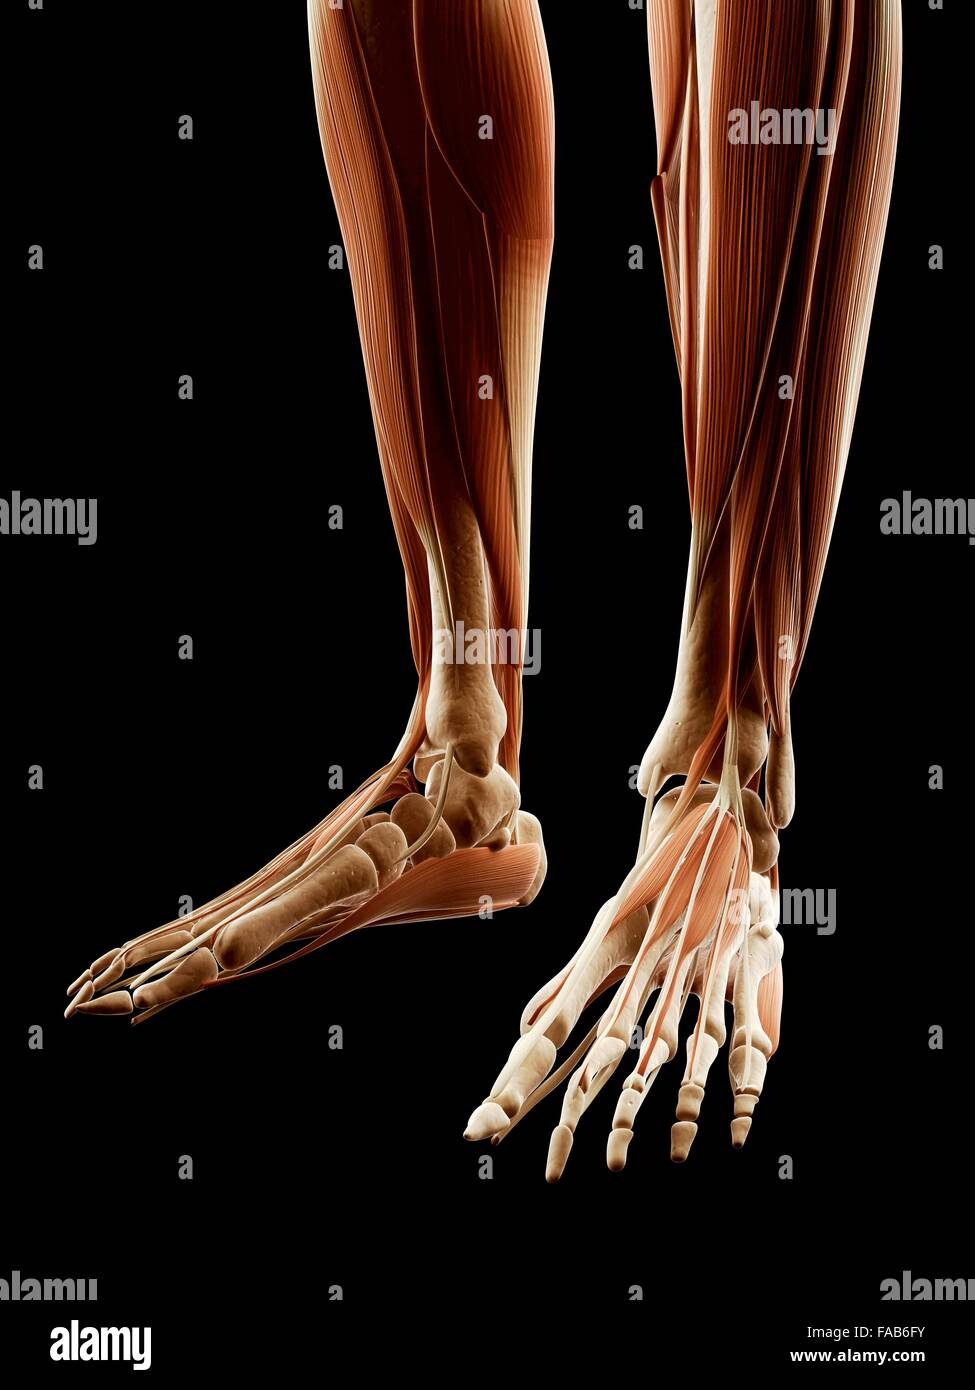 Human lower leg and foot muscles, computer illustration. Stock Photo